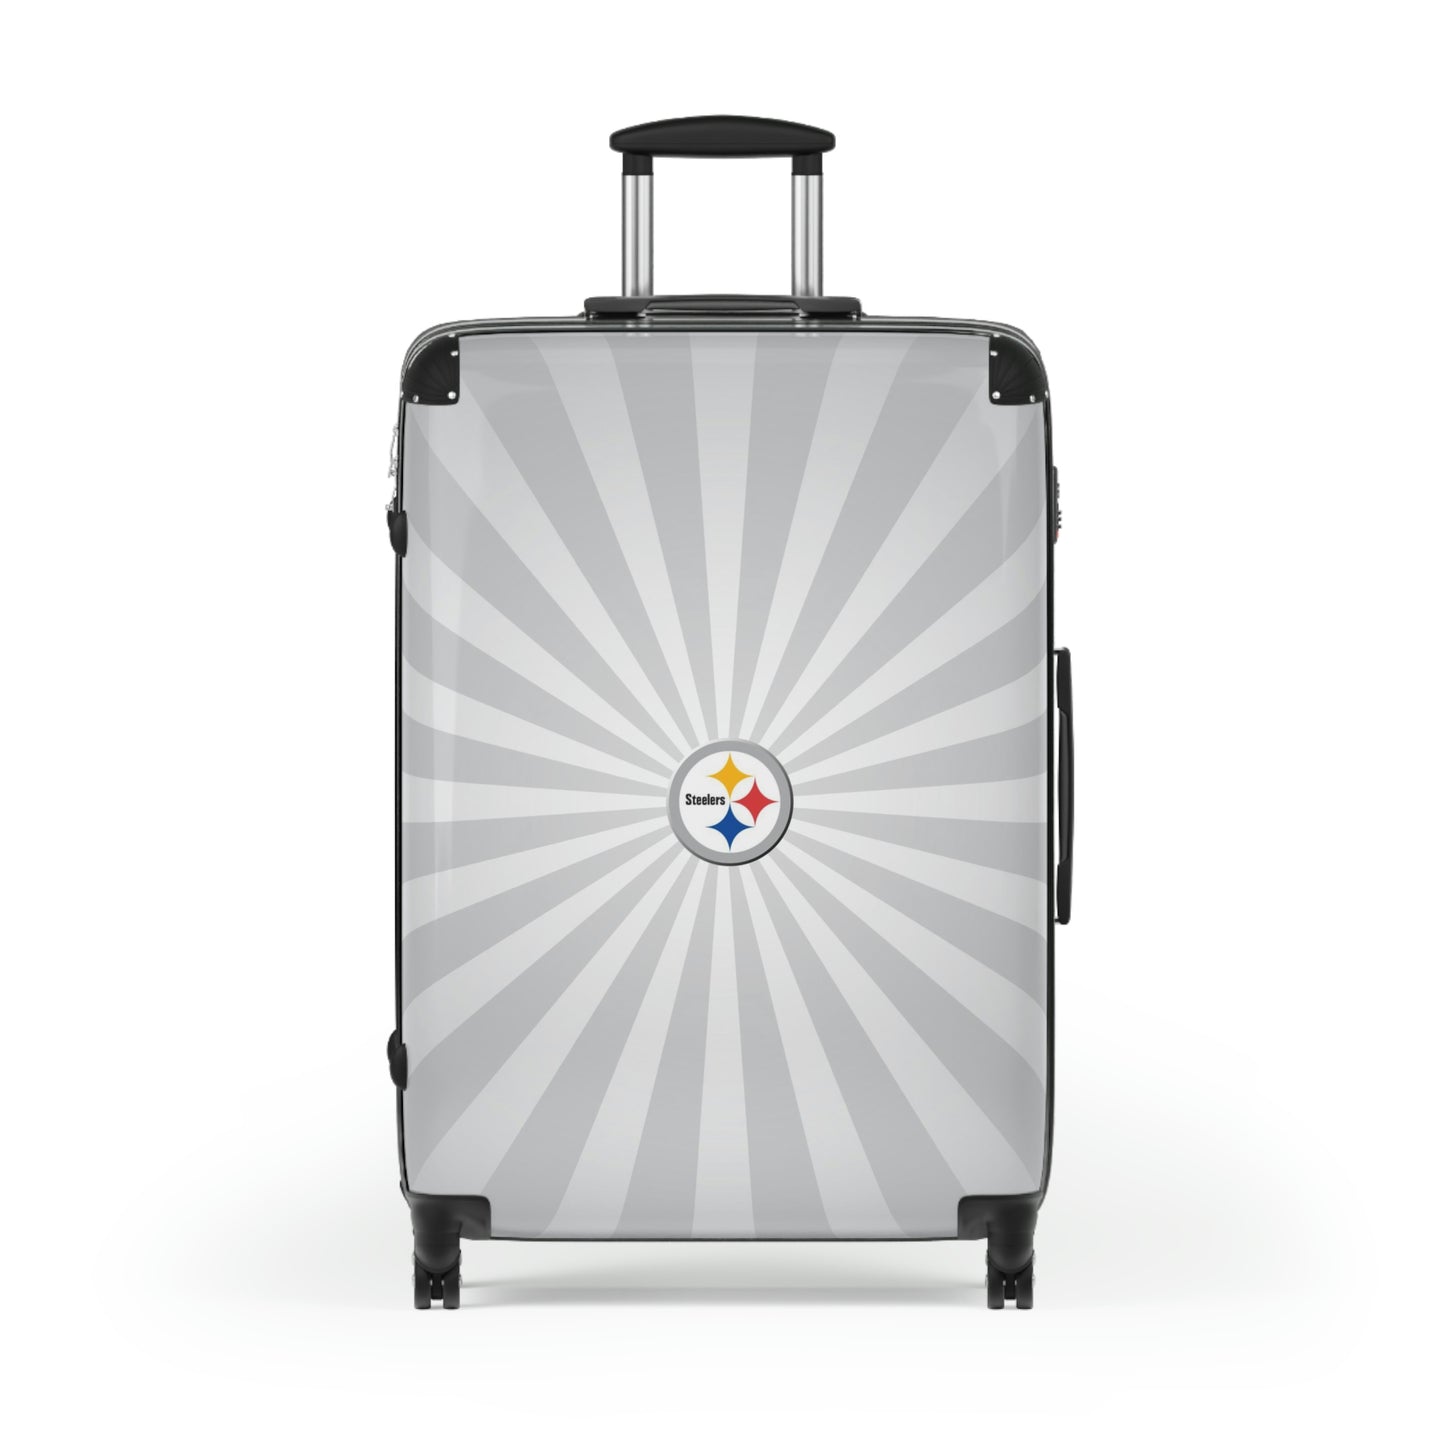 Geotrott Pittsburgh Steelers National Football League NFL Team Logo Cabin Suitcase Rolling Luggage Checking Bag